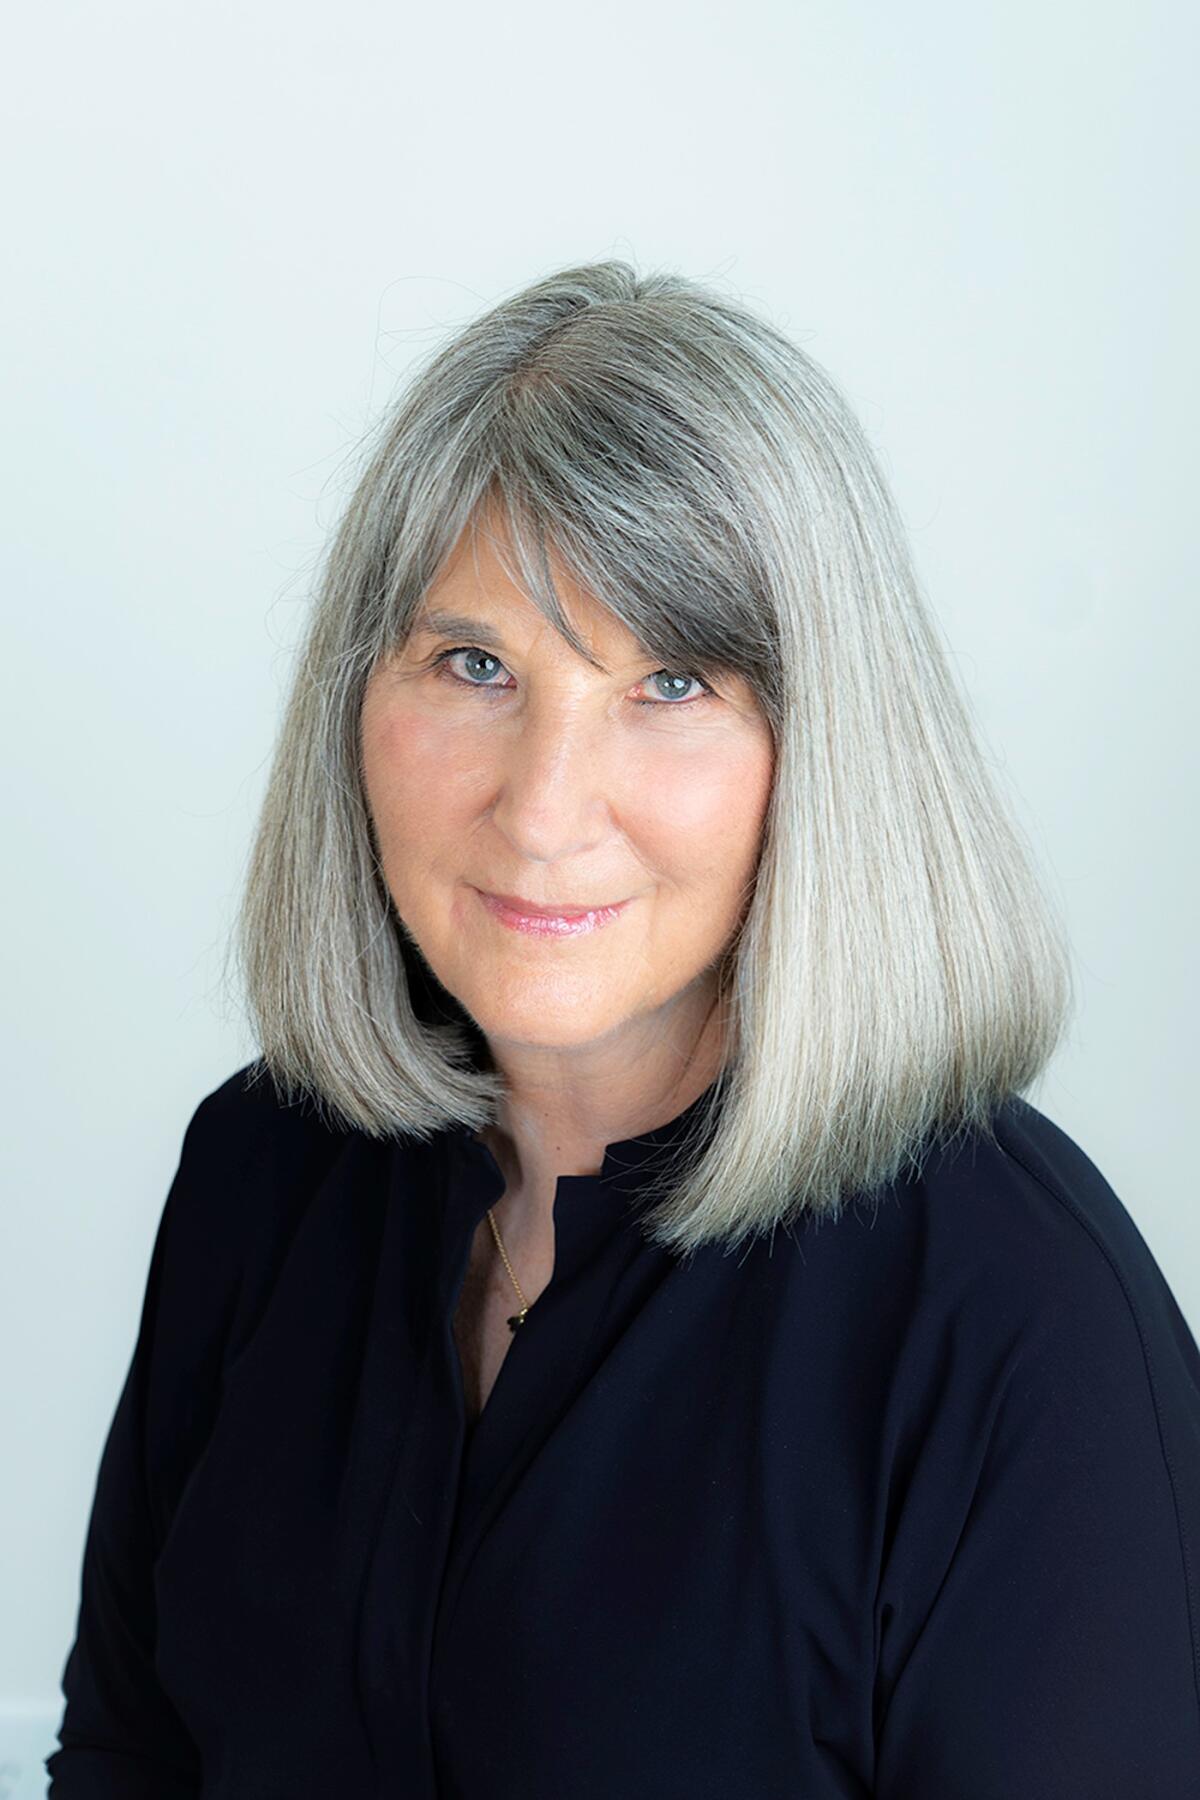 A woman with silver hair wearing a black dress sweater.